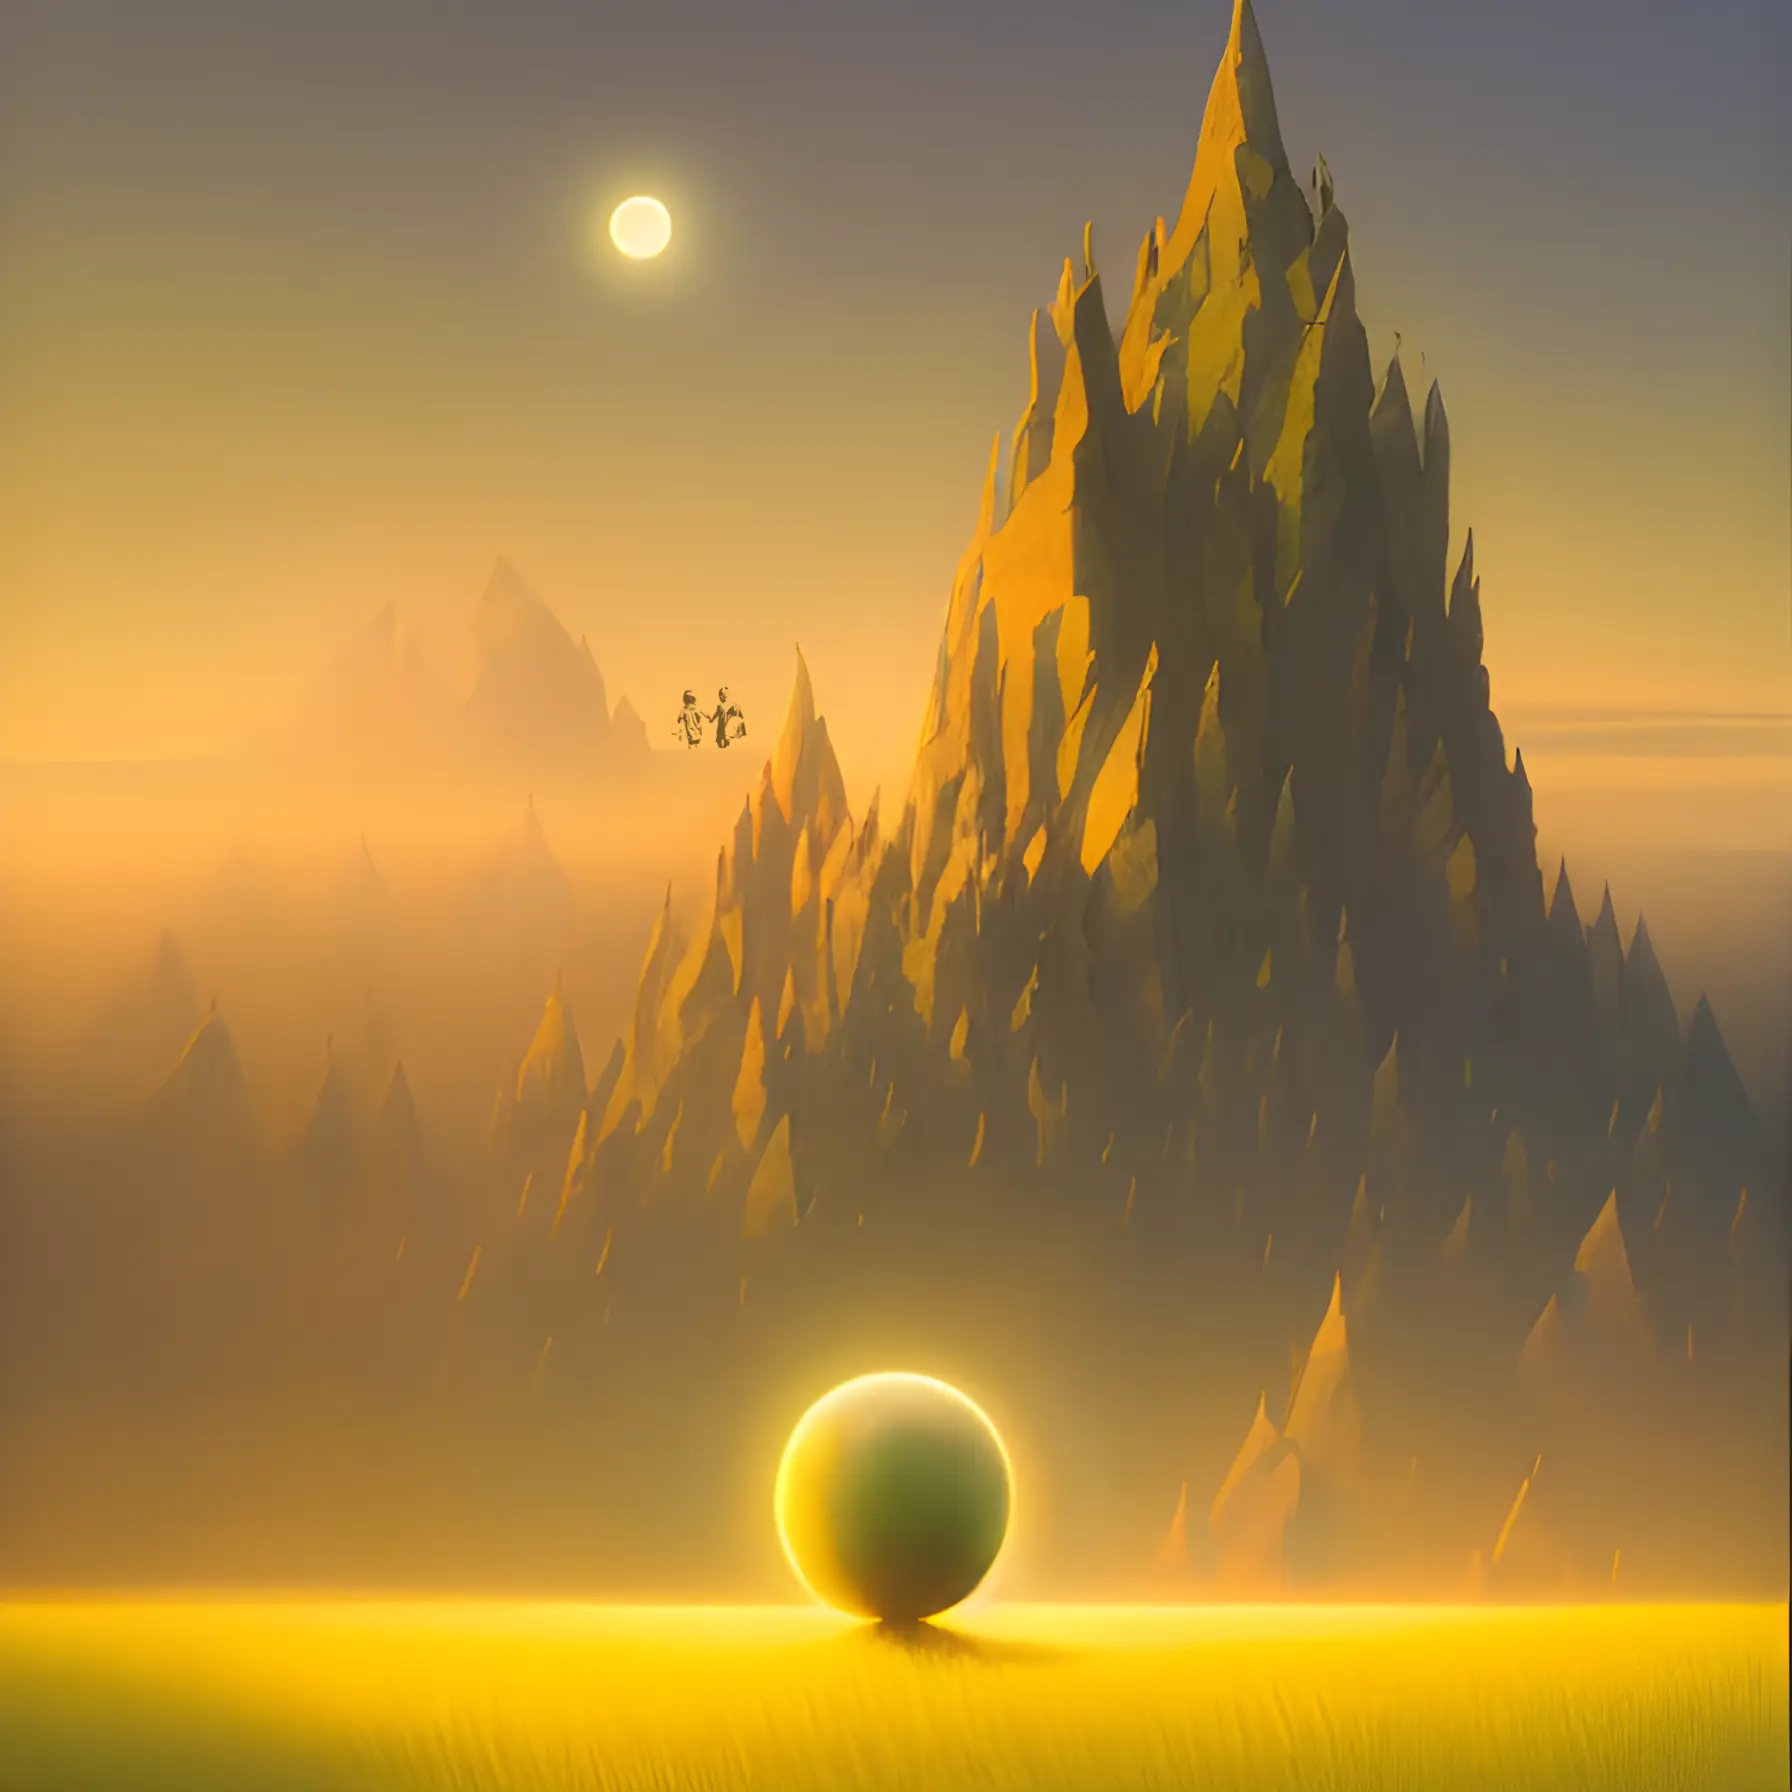 A golden hued ball sits on a grass covered hill in front of mountains far in the background. The image is orange-gold sepia toned. A thoughtful image.